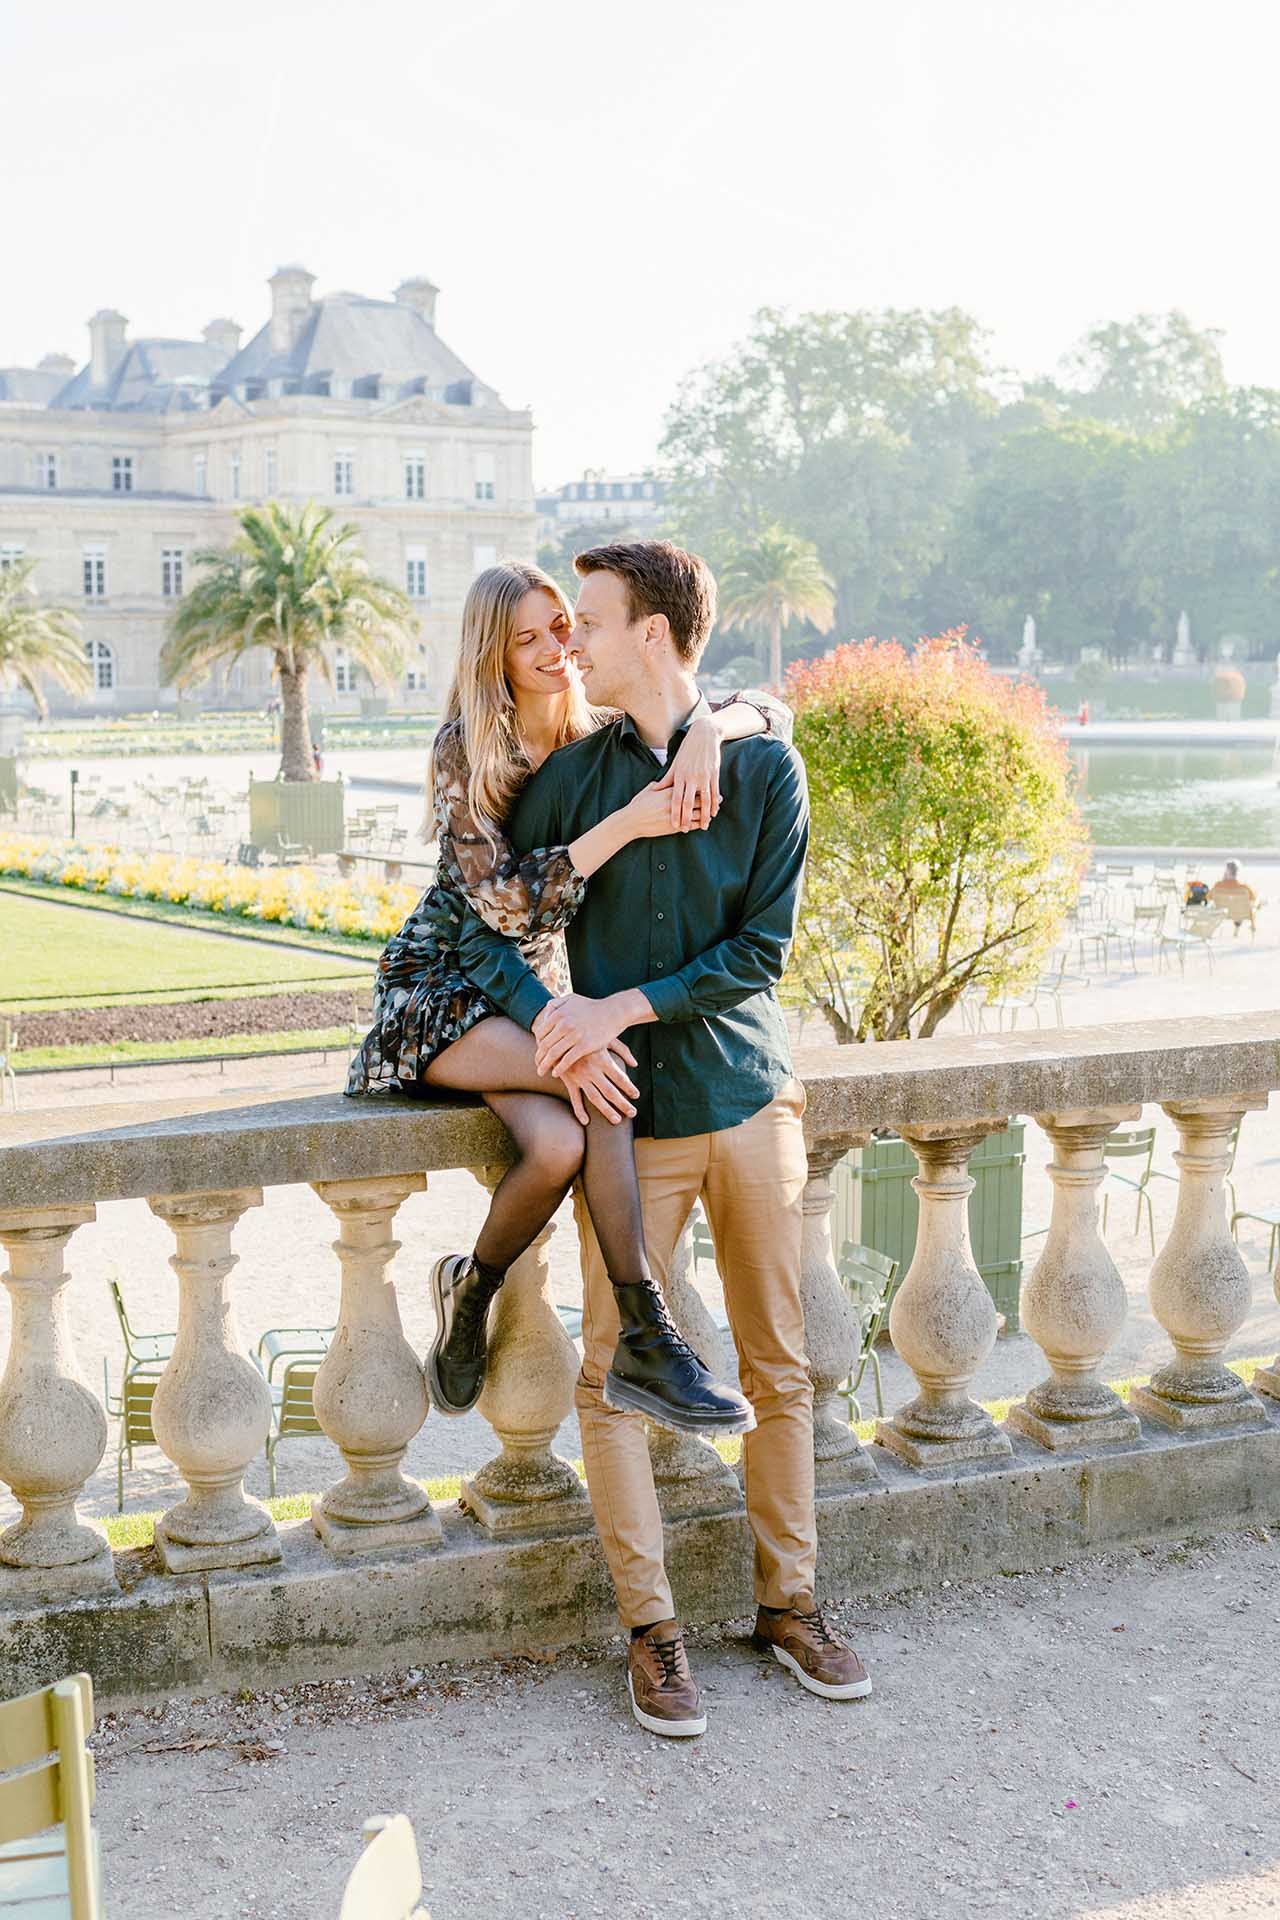 Paris Surprise Proposal and Engagement Photoshoot at Luxembourg Garden